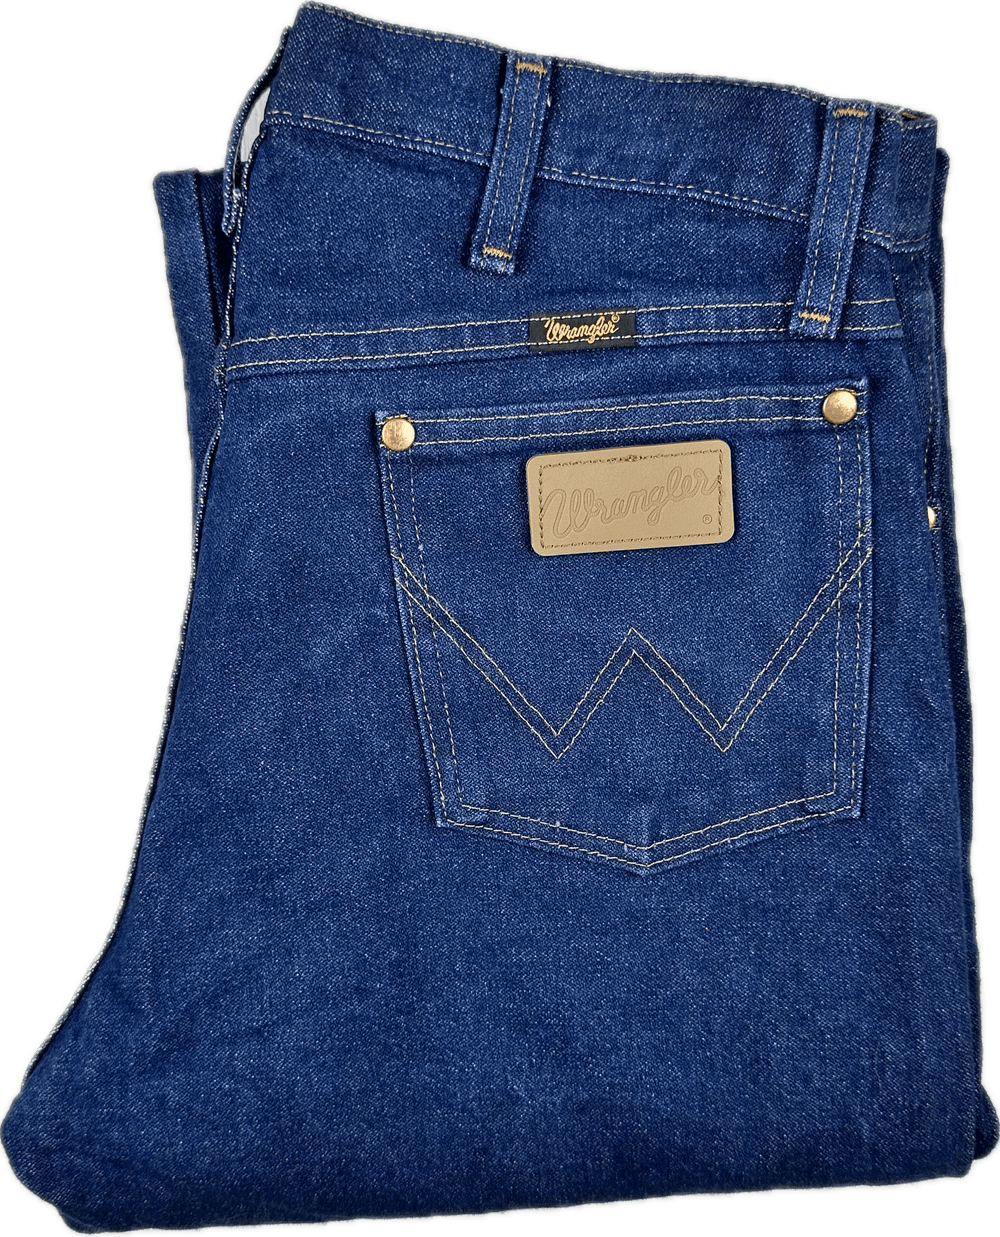 Wrangler Classic Straight Mens Jeans - Size 32/30 - Jean Pool